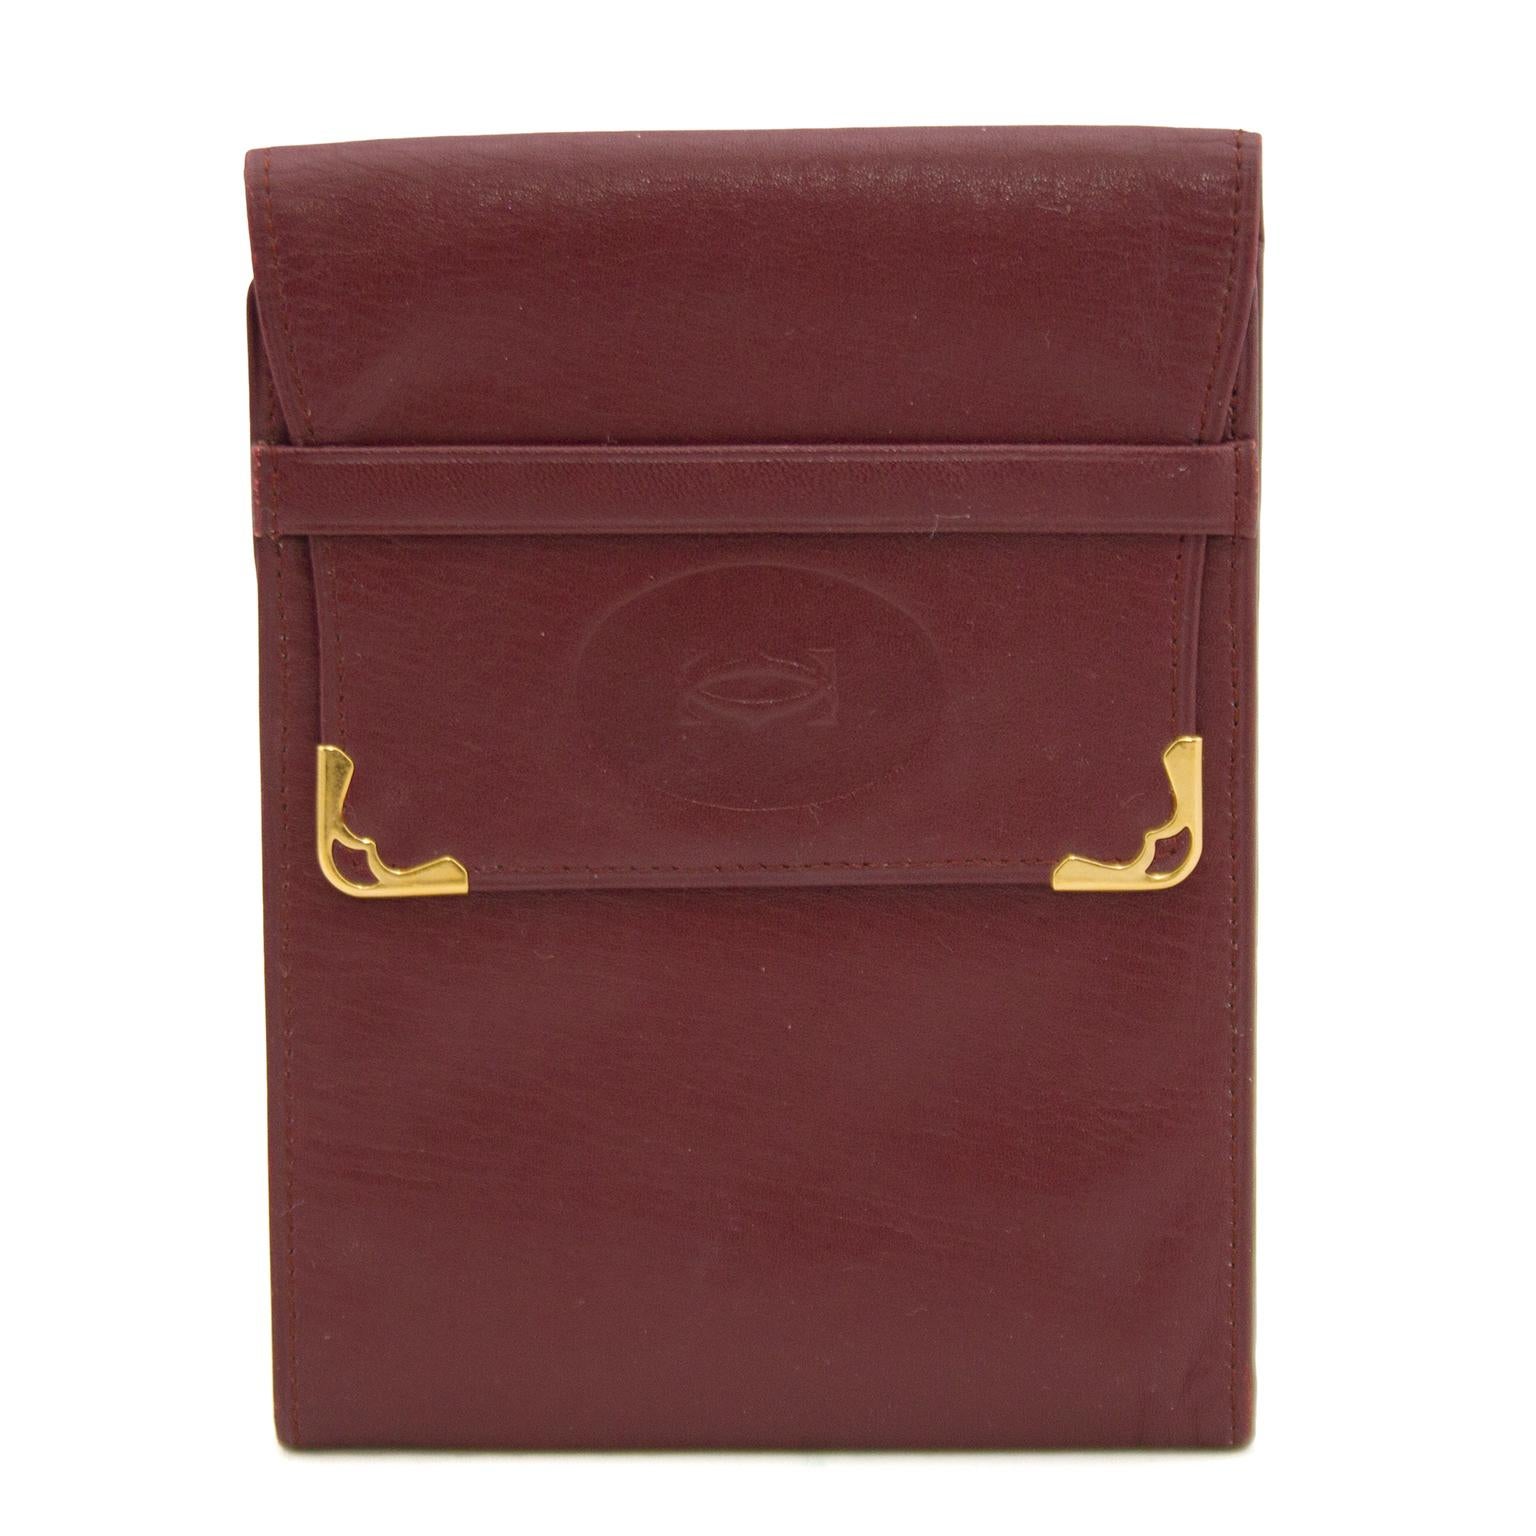 Cartier burgundy leather bill fold wallet from the 1980s with a fold over belted closure detail and goldtone metal corners. The flap is embossed with the Cartier CC logo and the entire wallet is stitched in matching burgundy thread. The interior